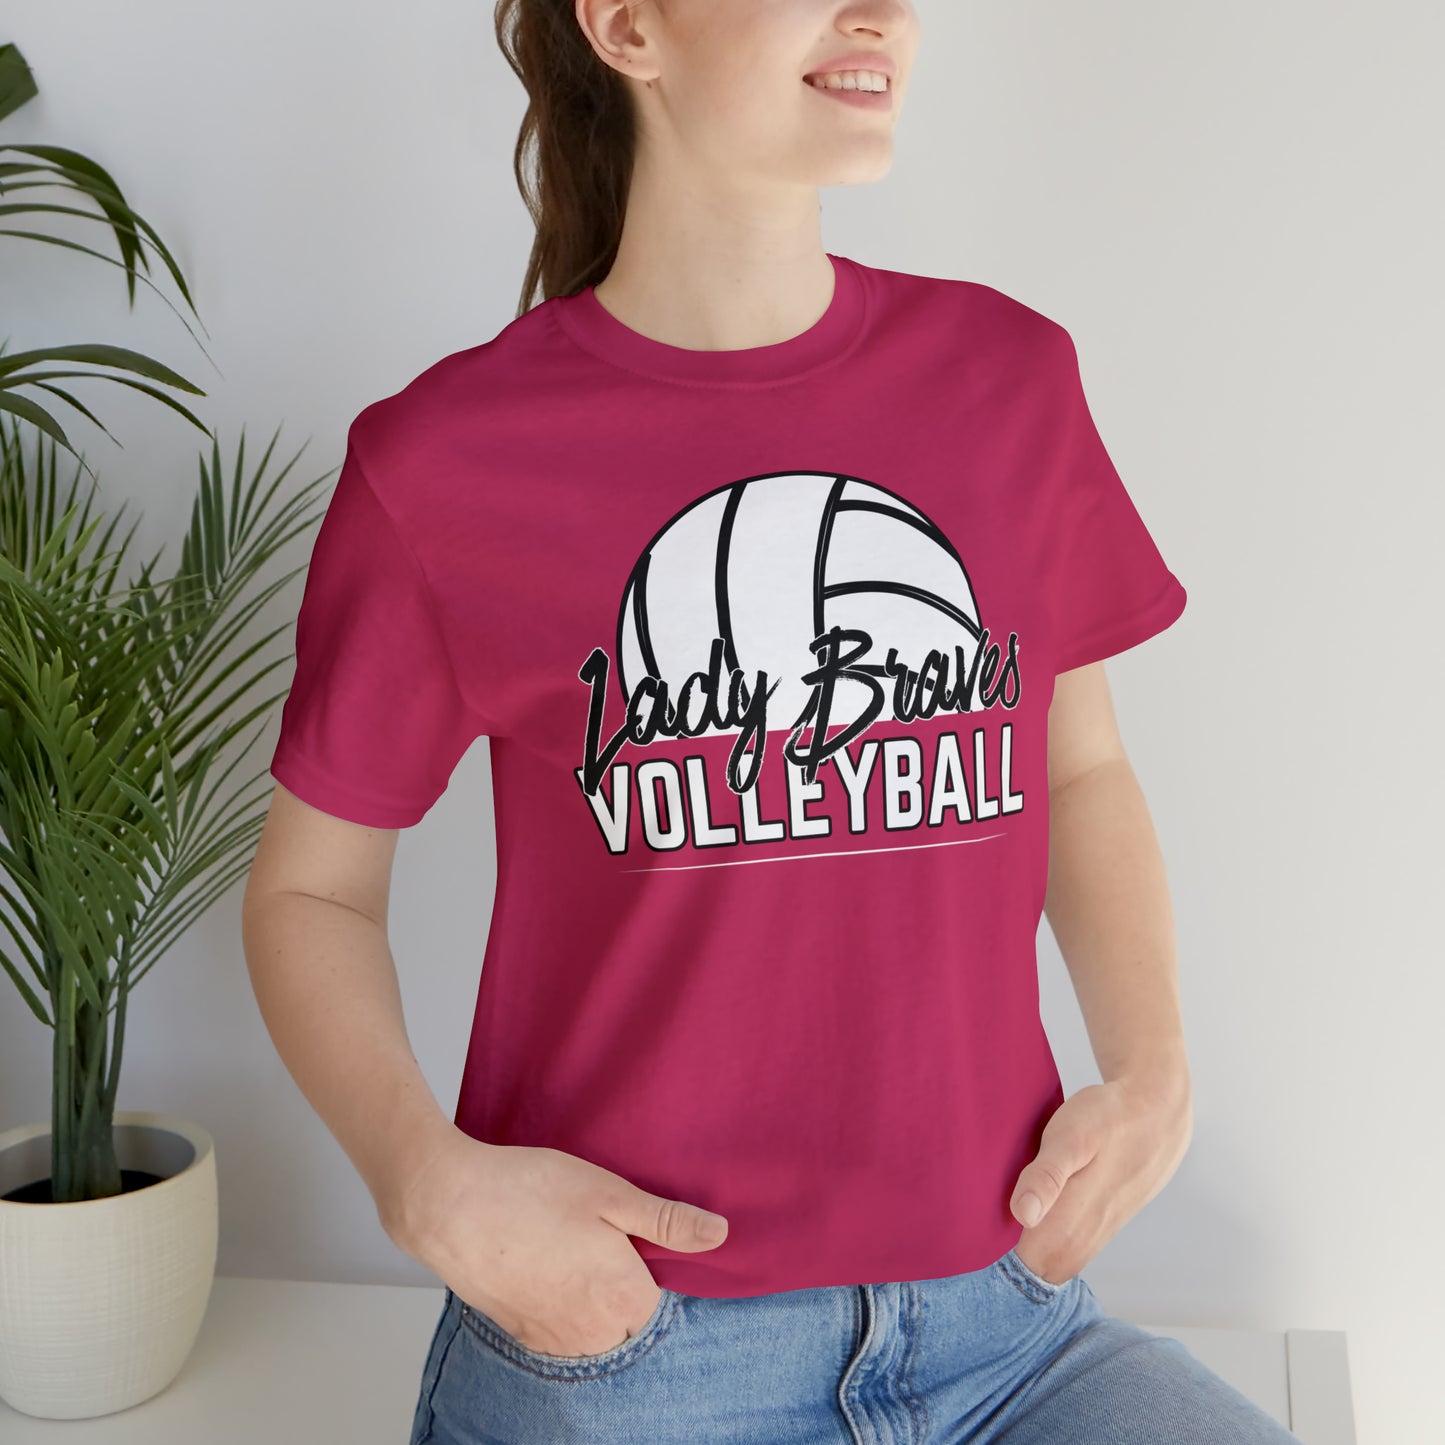 Lady Braves Volleyball Short Sleeve Tee